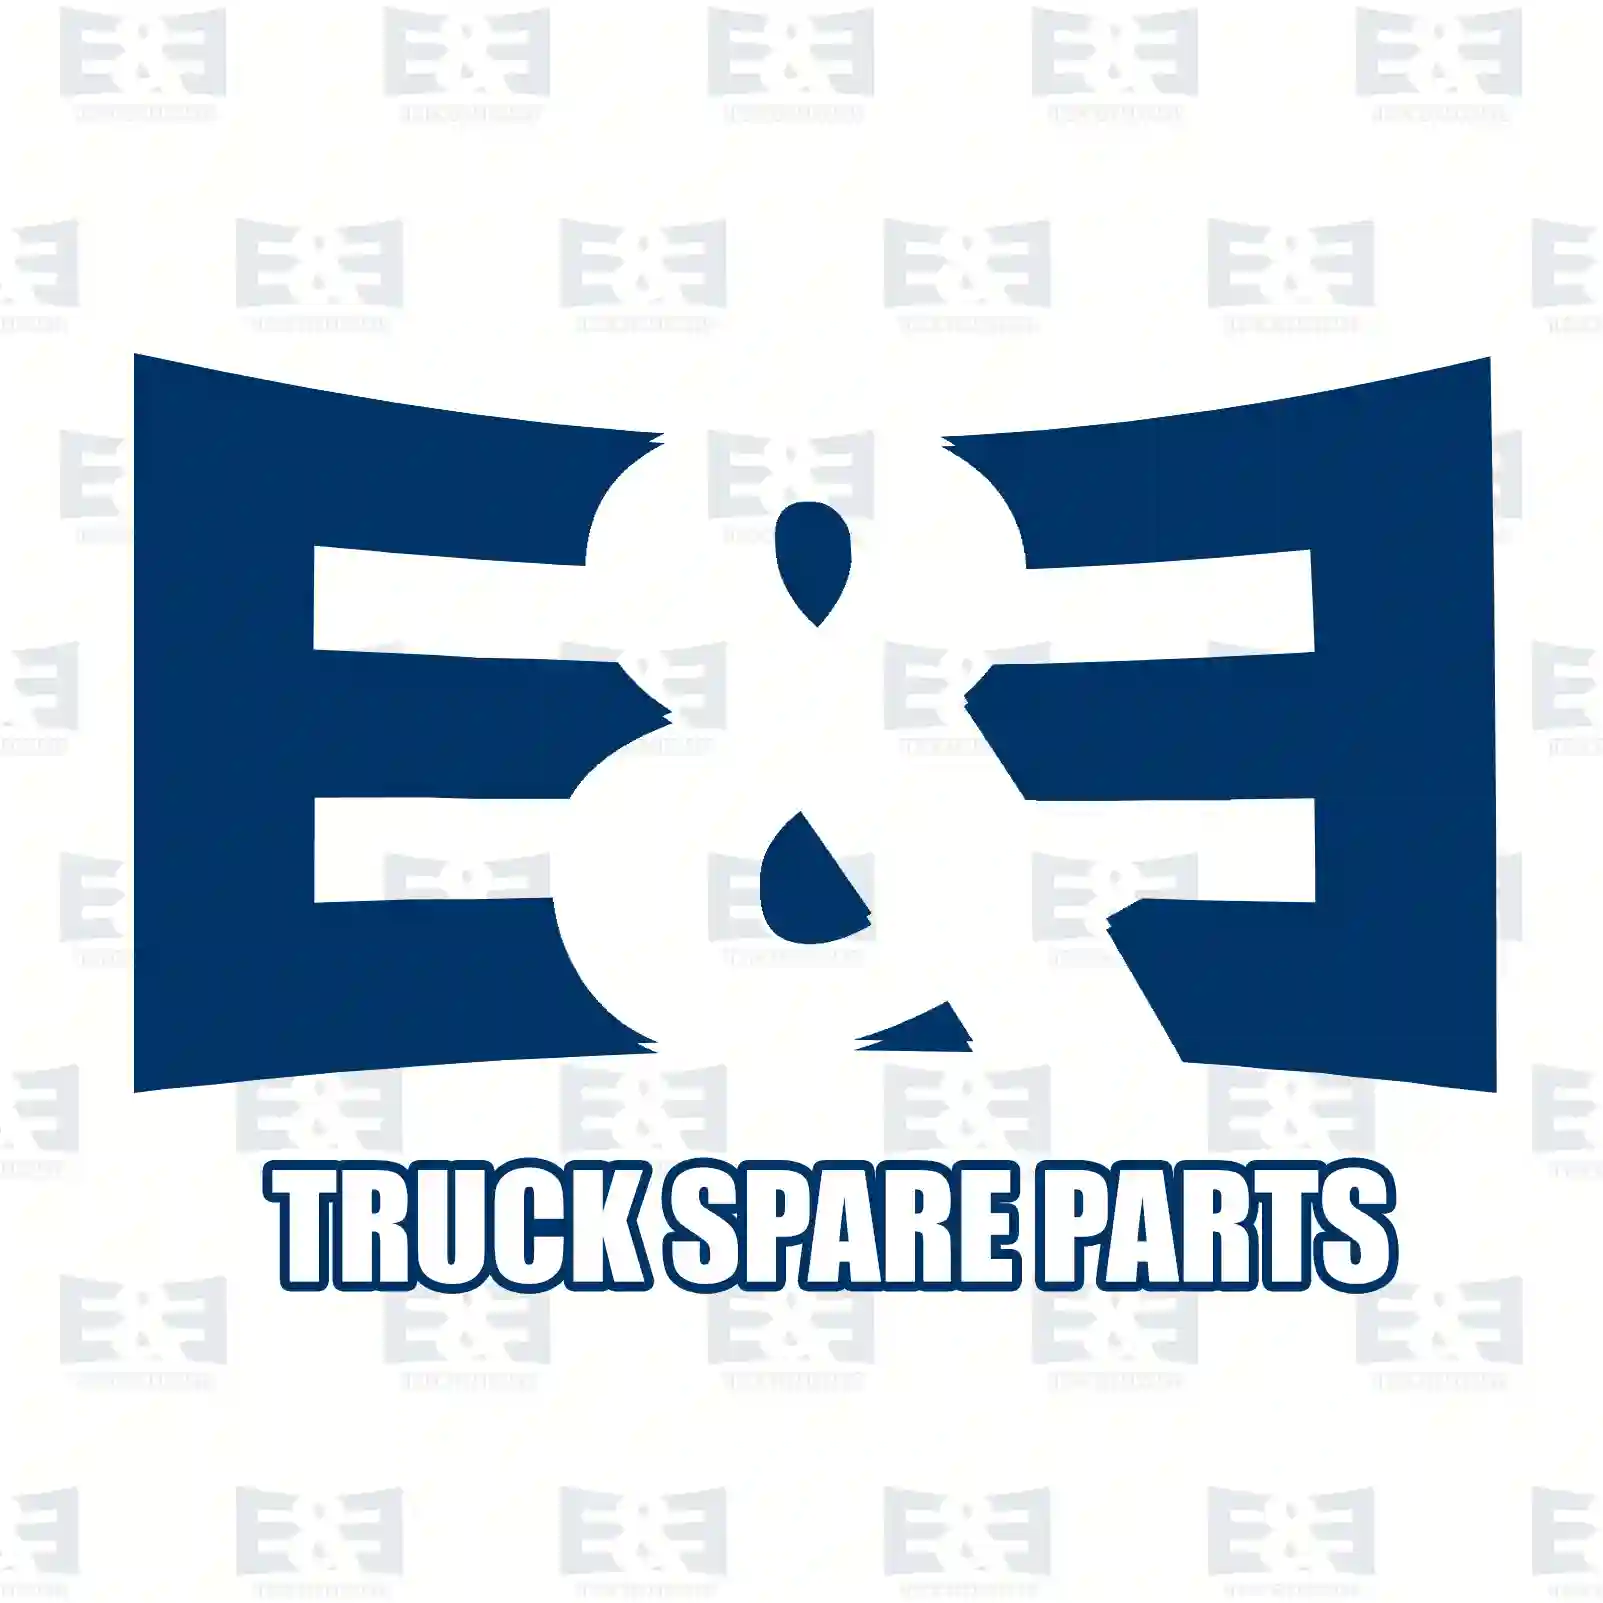 King pin kit, with bearing, 2E2279688, 3090266S, ZG41295-0008, , ||  2E2279688 E&E Truck Spare Parts | Truck Spare Parts, Auotomotive Spare Parts King pin kit, with bearing, 2E2279688, 3090266S, ZG41295-0008, , ||  2E2279688 E&E Truck Spare Parts | Truck Spare Parts, Auotomotive Spare Parts